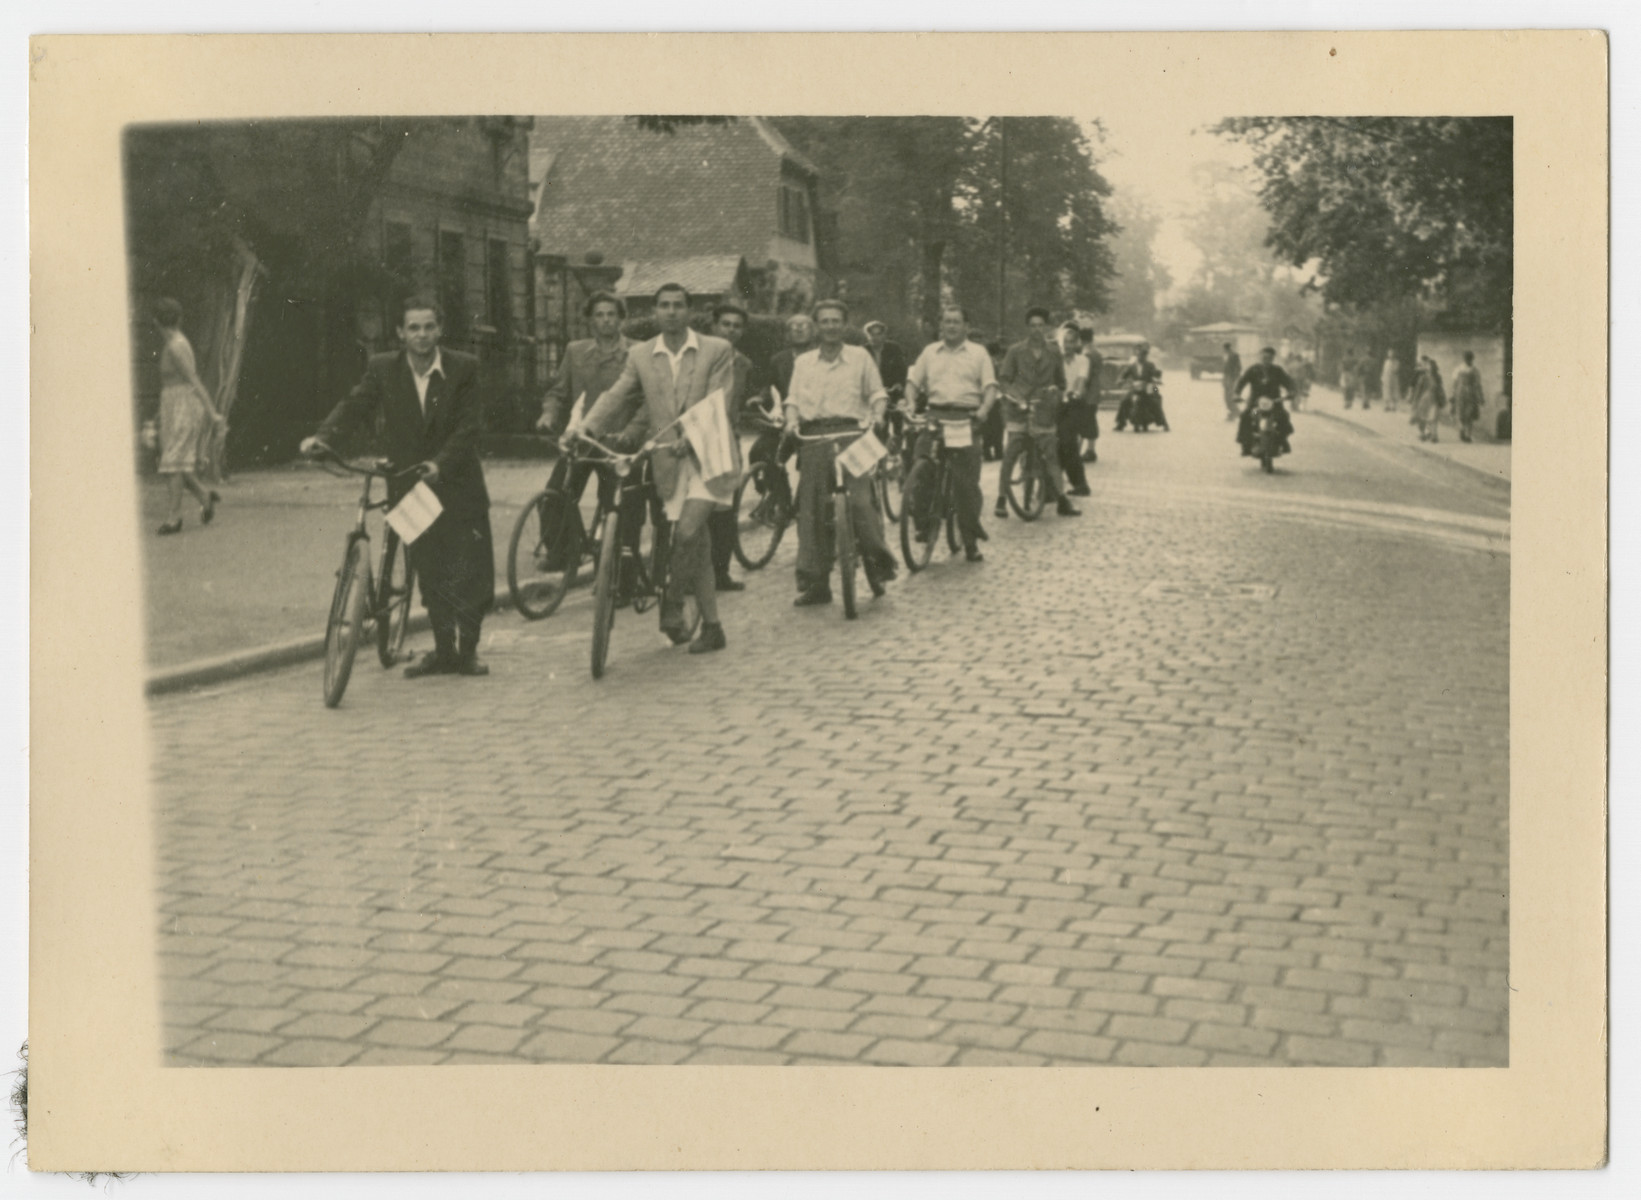 Jewish displaced persons form a bicycle parade holding Zionist flags.